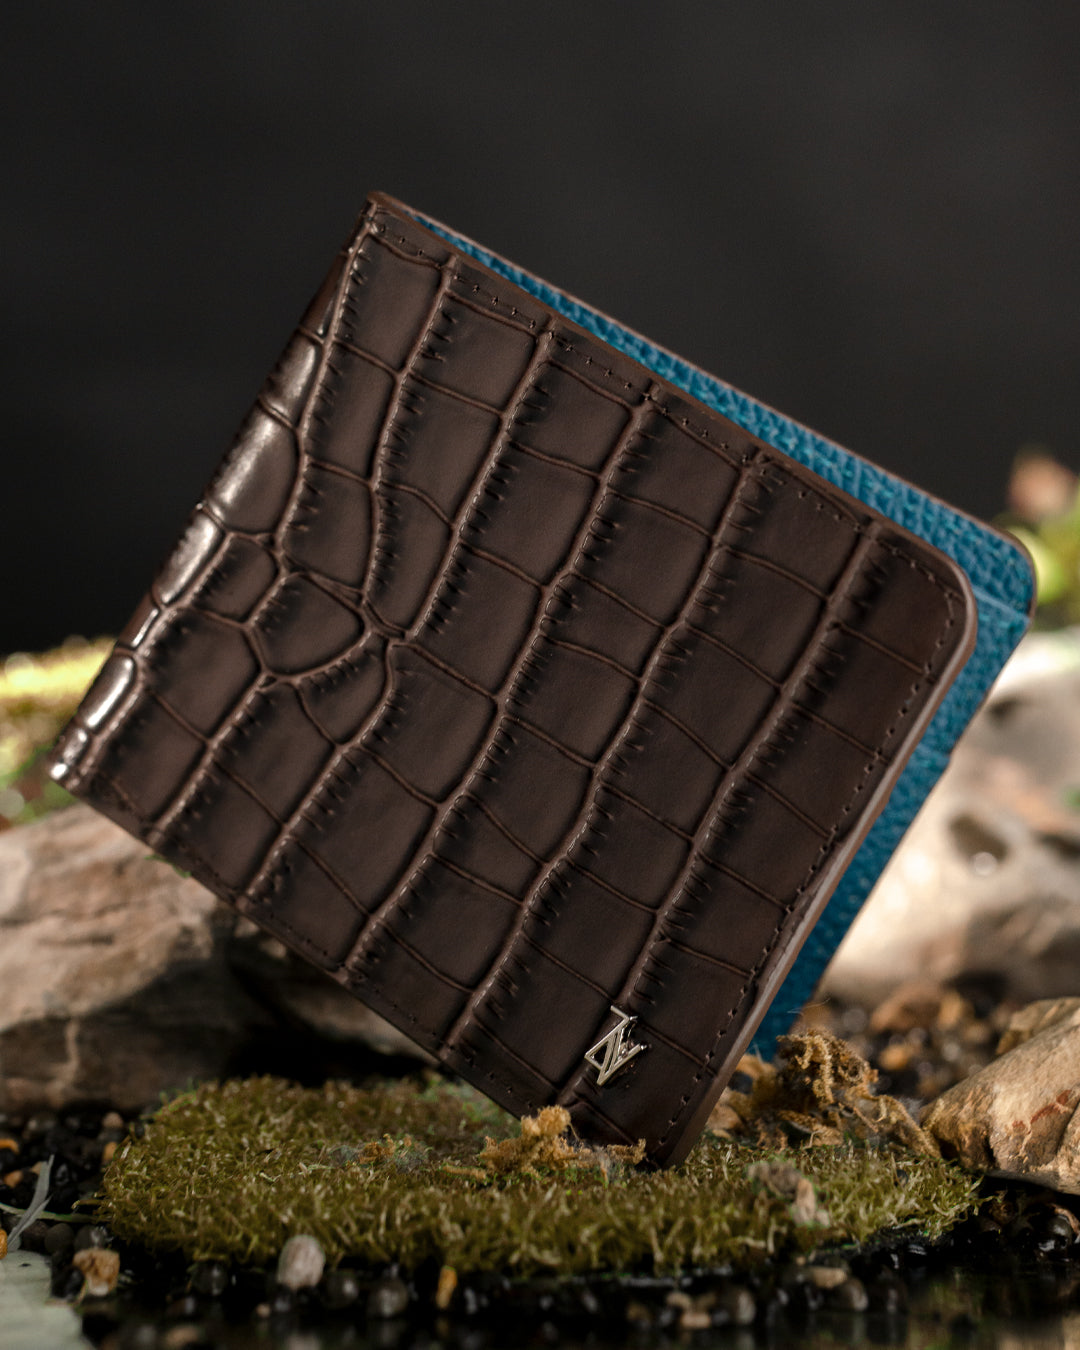 Artemis Croco Wallet - Coffee and Dark Turquoise Leather